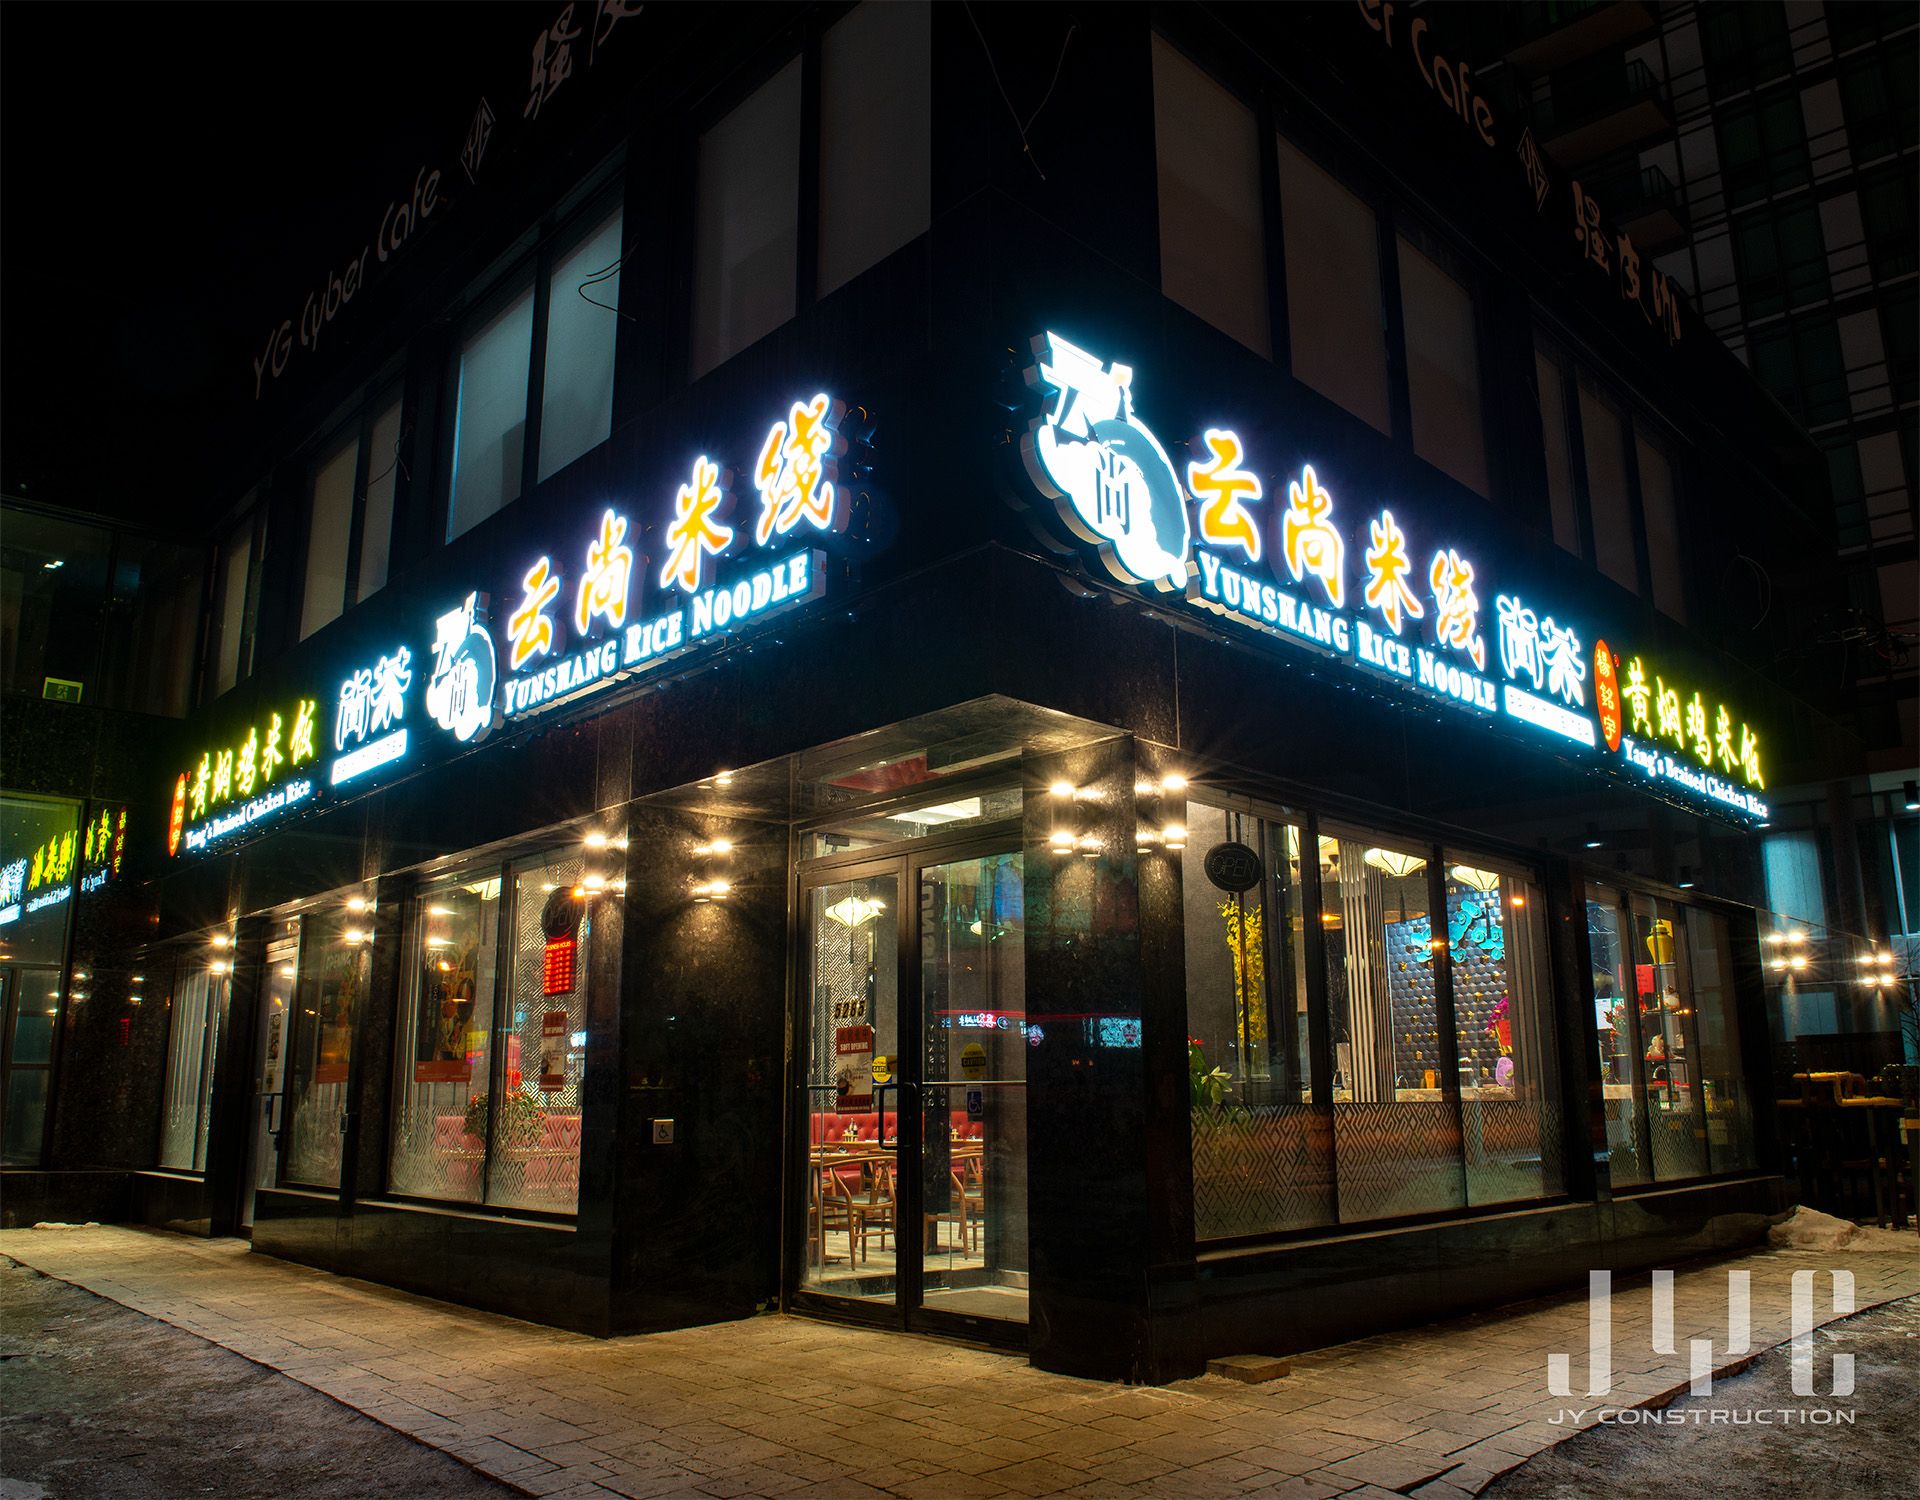 yunshang-rice-noodle-restaurant-chinese-restaurant-design-in-north-york-by-jy-construction-in-english-4.jpg